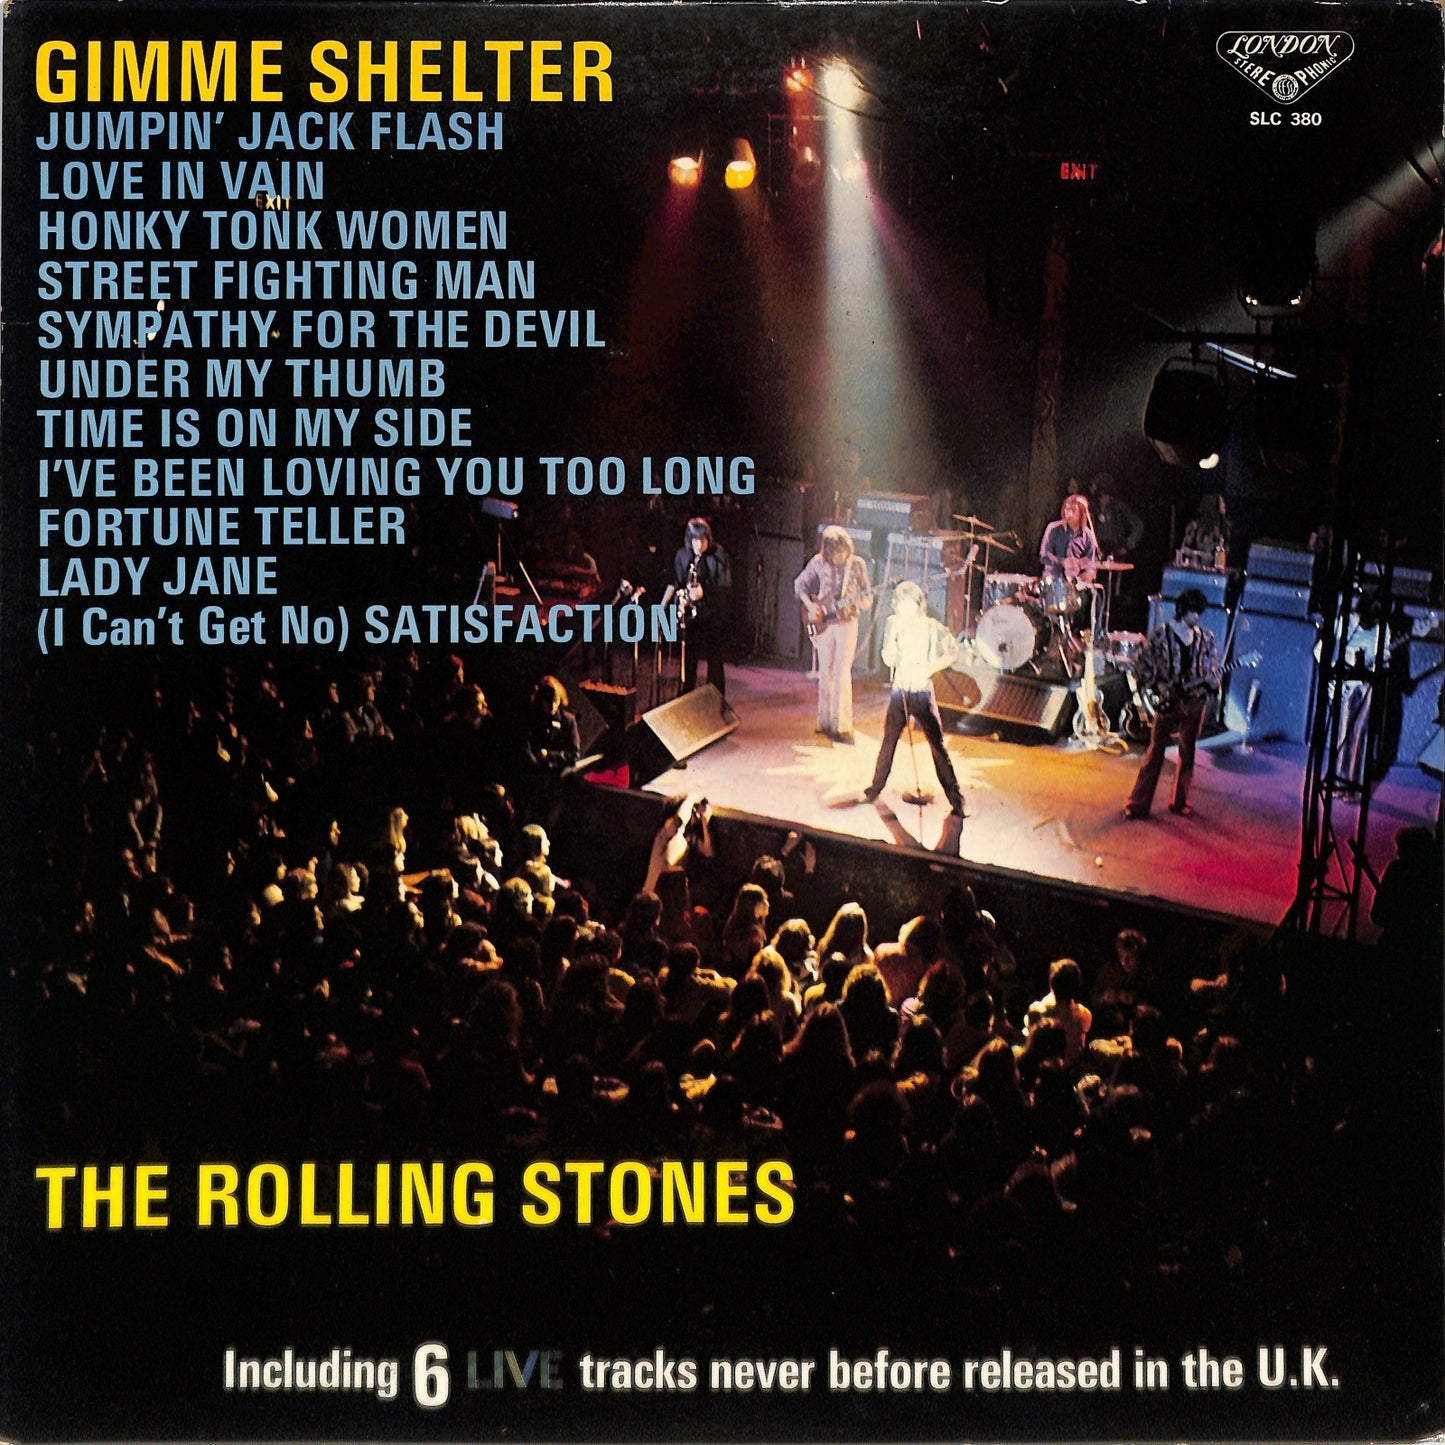 THE ROLLING STONES - Gimme Shelter